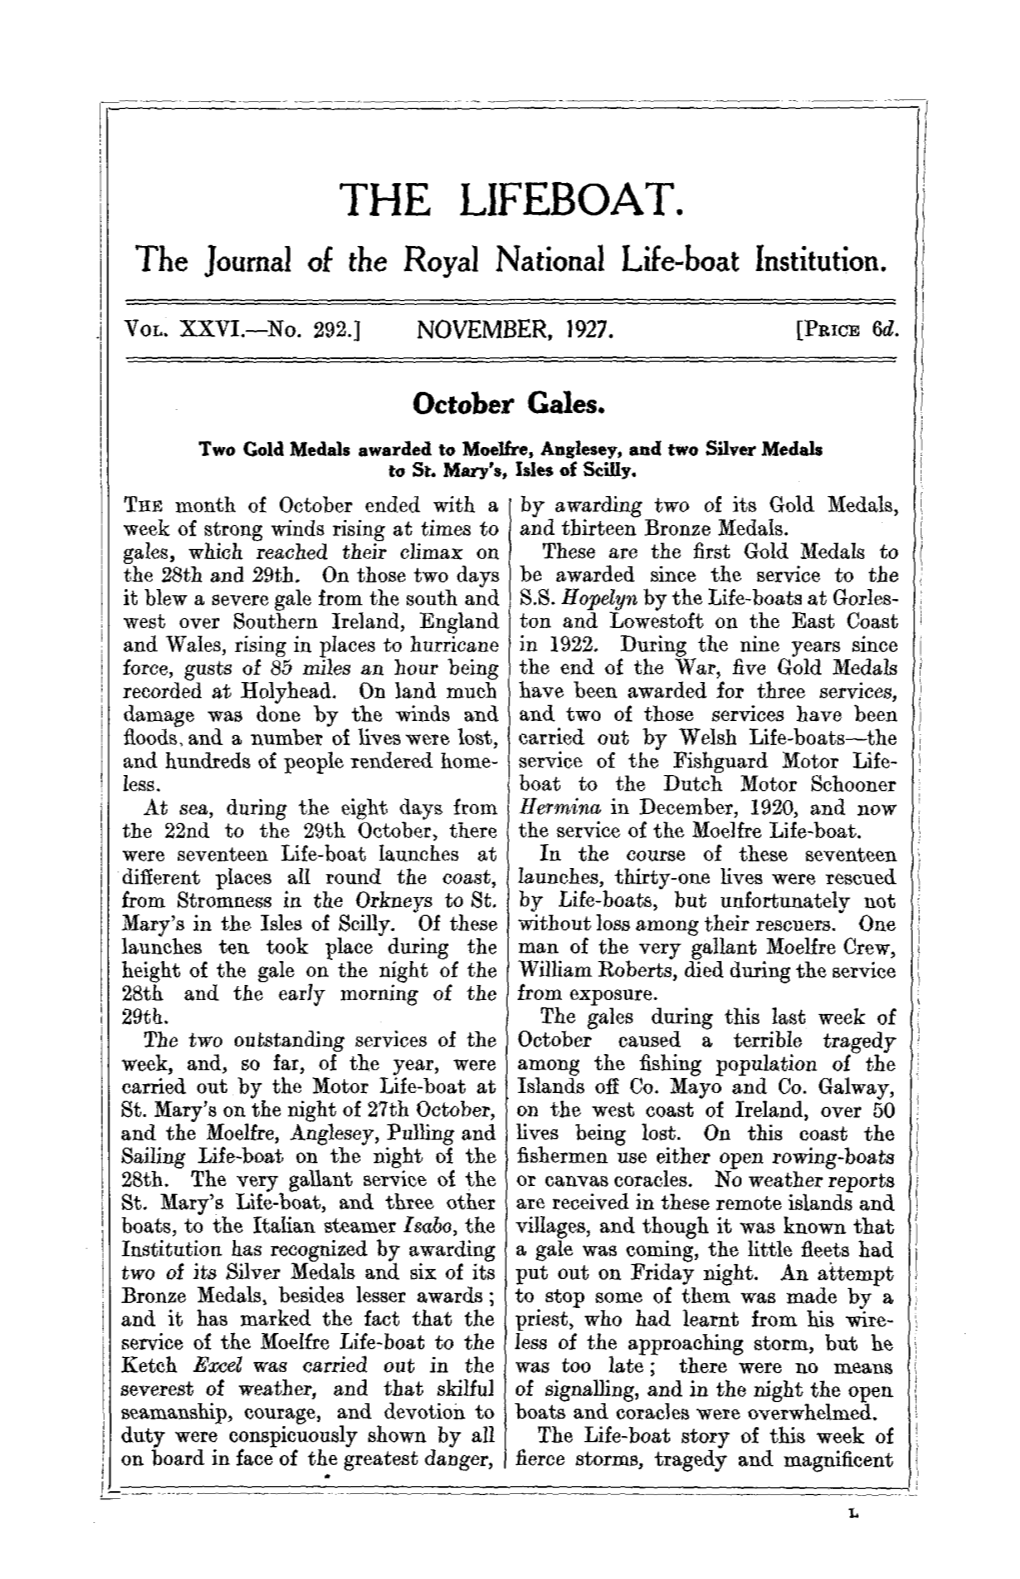 THE LIFEBOAT. the Journal of the Royal National Life-Boat Institution